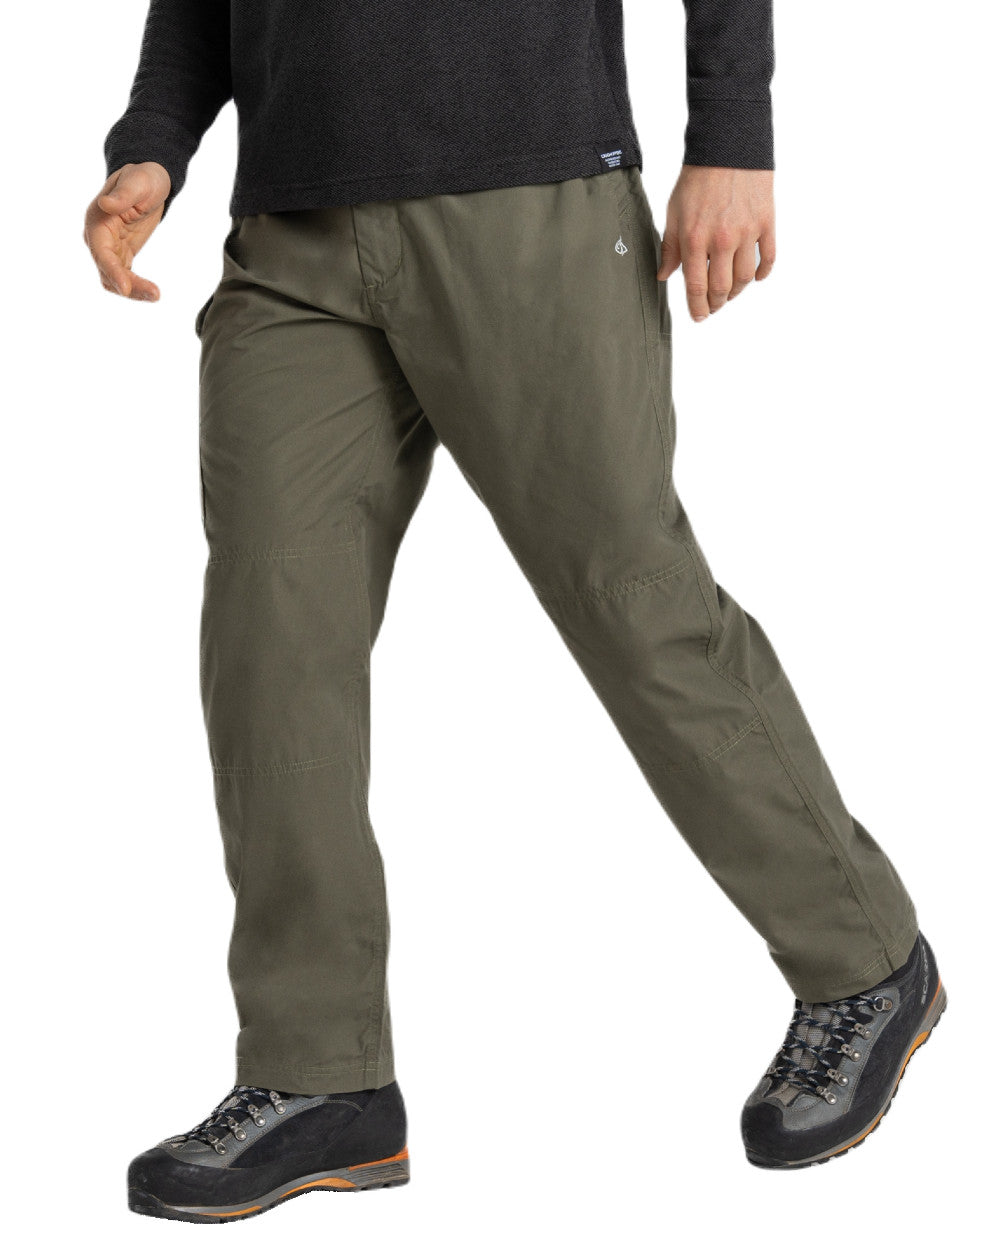 Wild Olive Coloured Craghoppers Mens Kiwi Classic Trousers On A White Background 